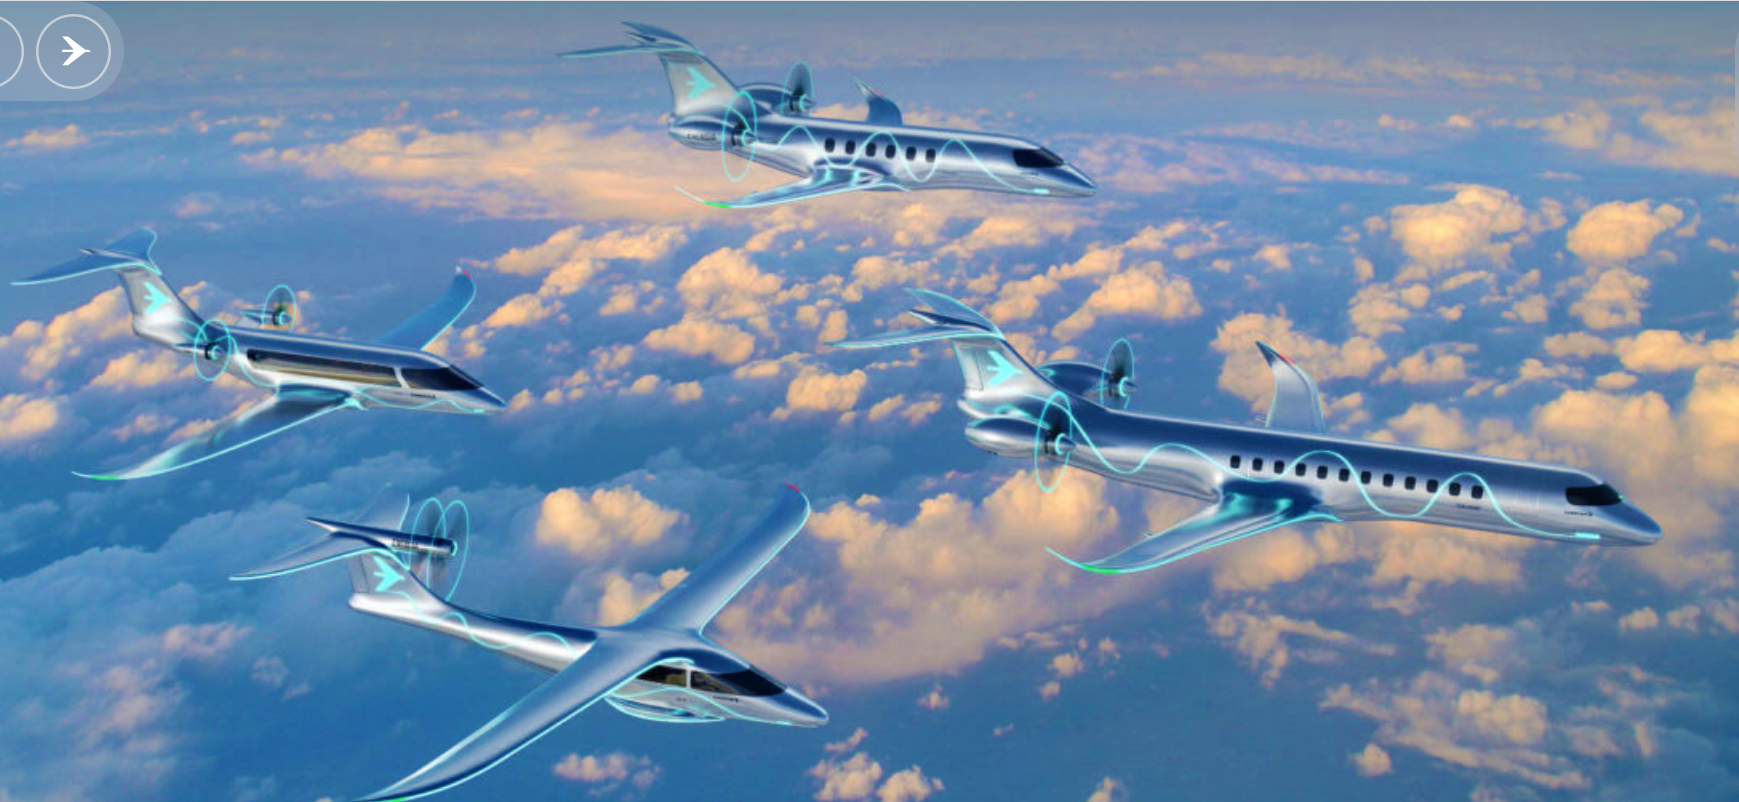 What  is   Embraer's   sustainable  propulsion  technology  concept  through  2050  aiming  a  net  carbon  zero  by  2050 ?